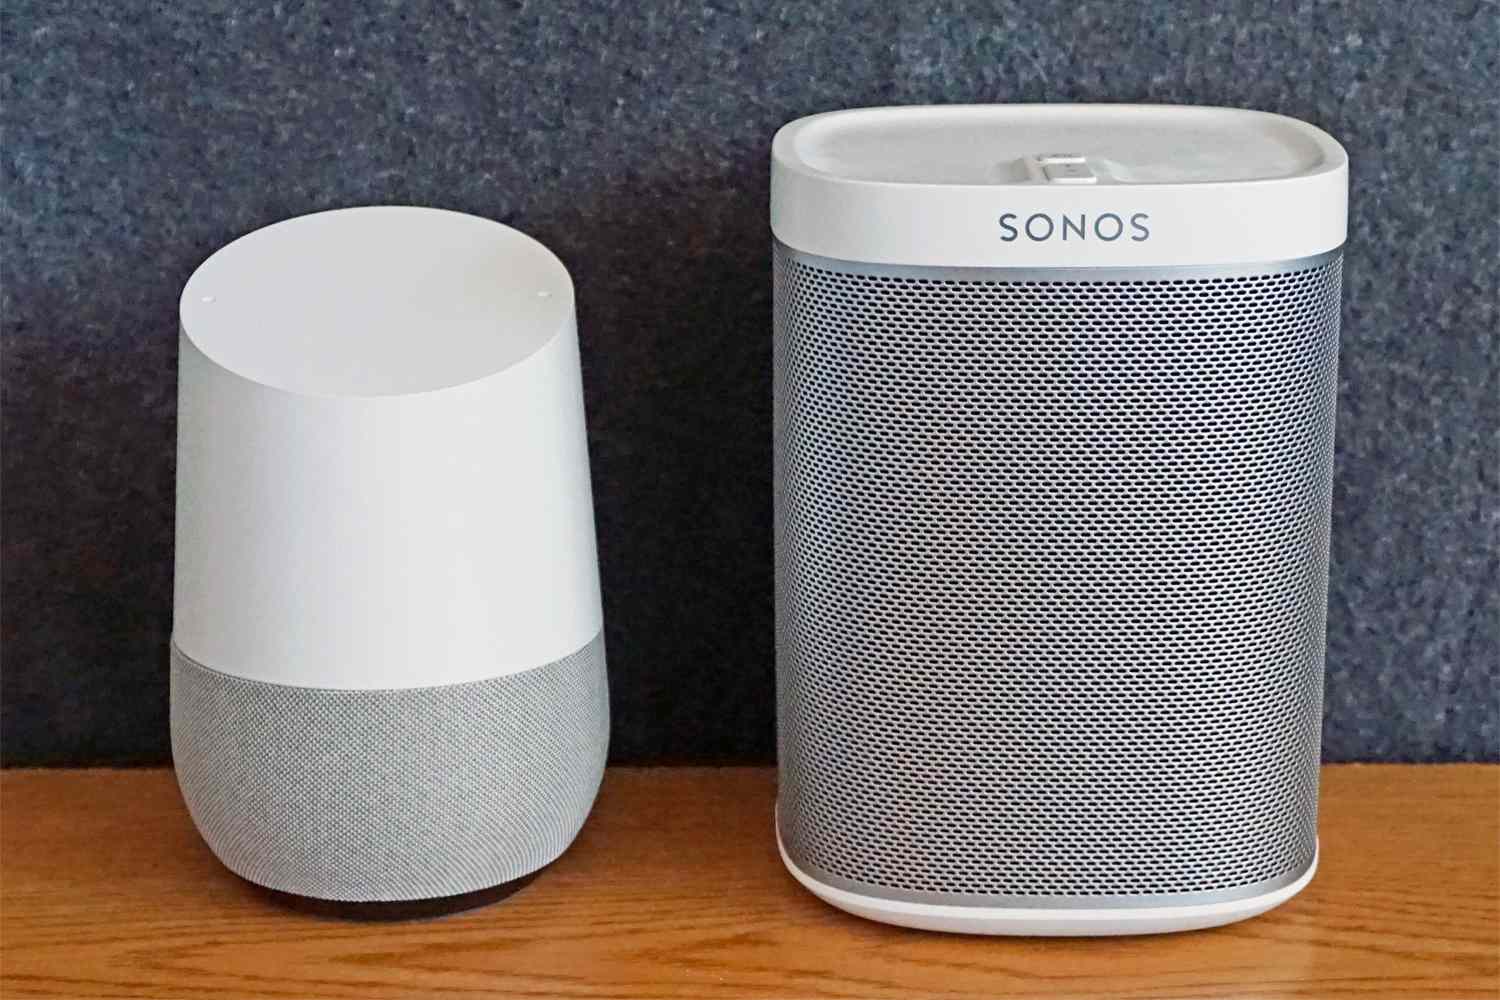 When Will Sonos Work With Google Home?